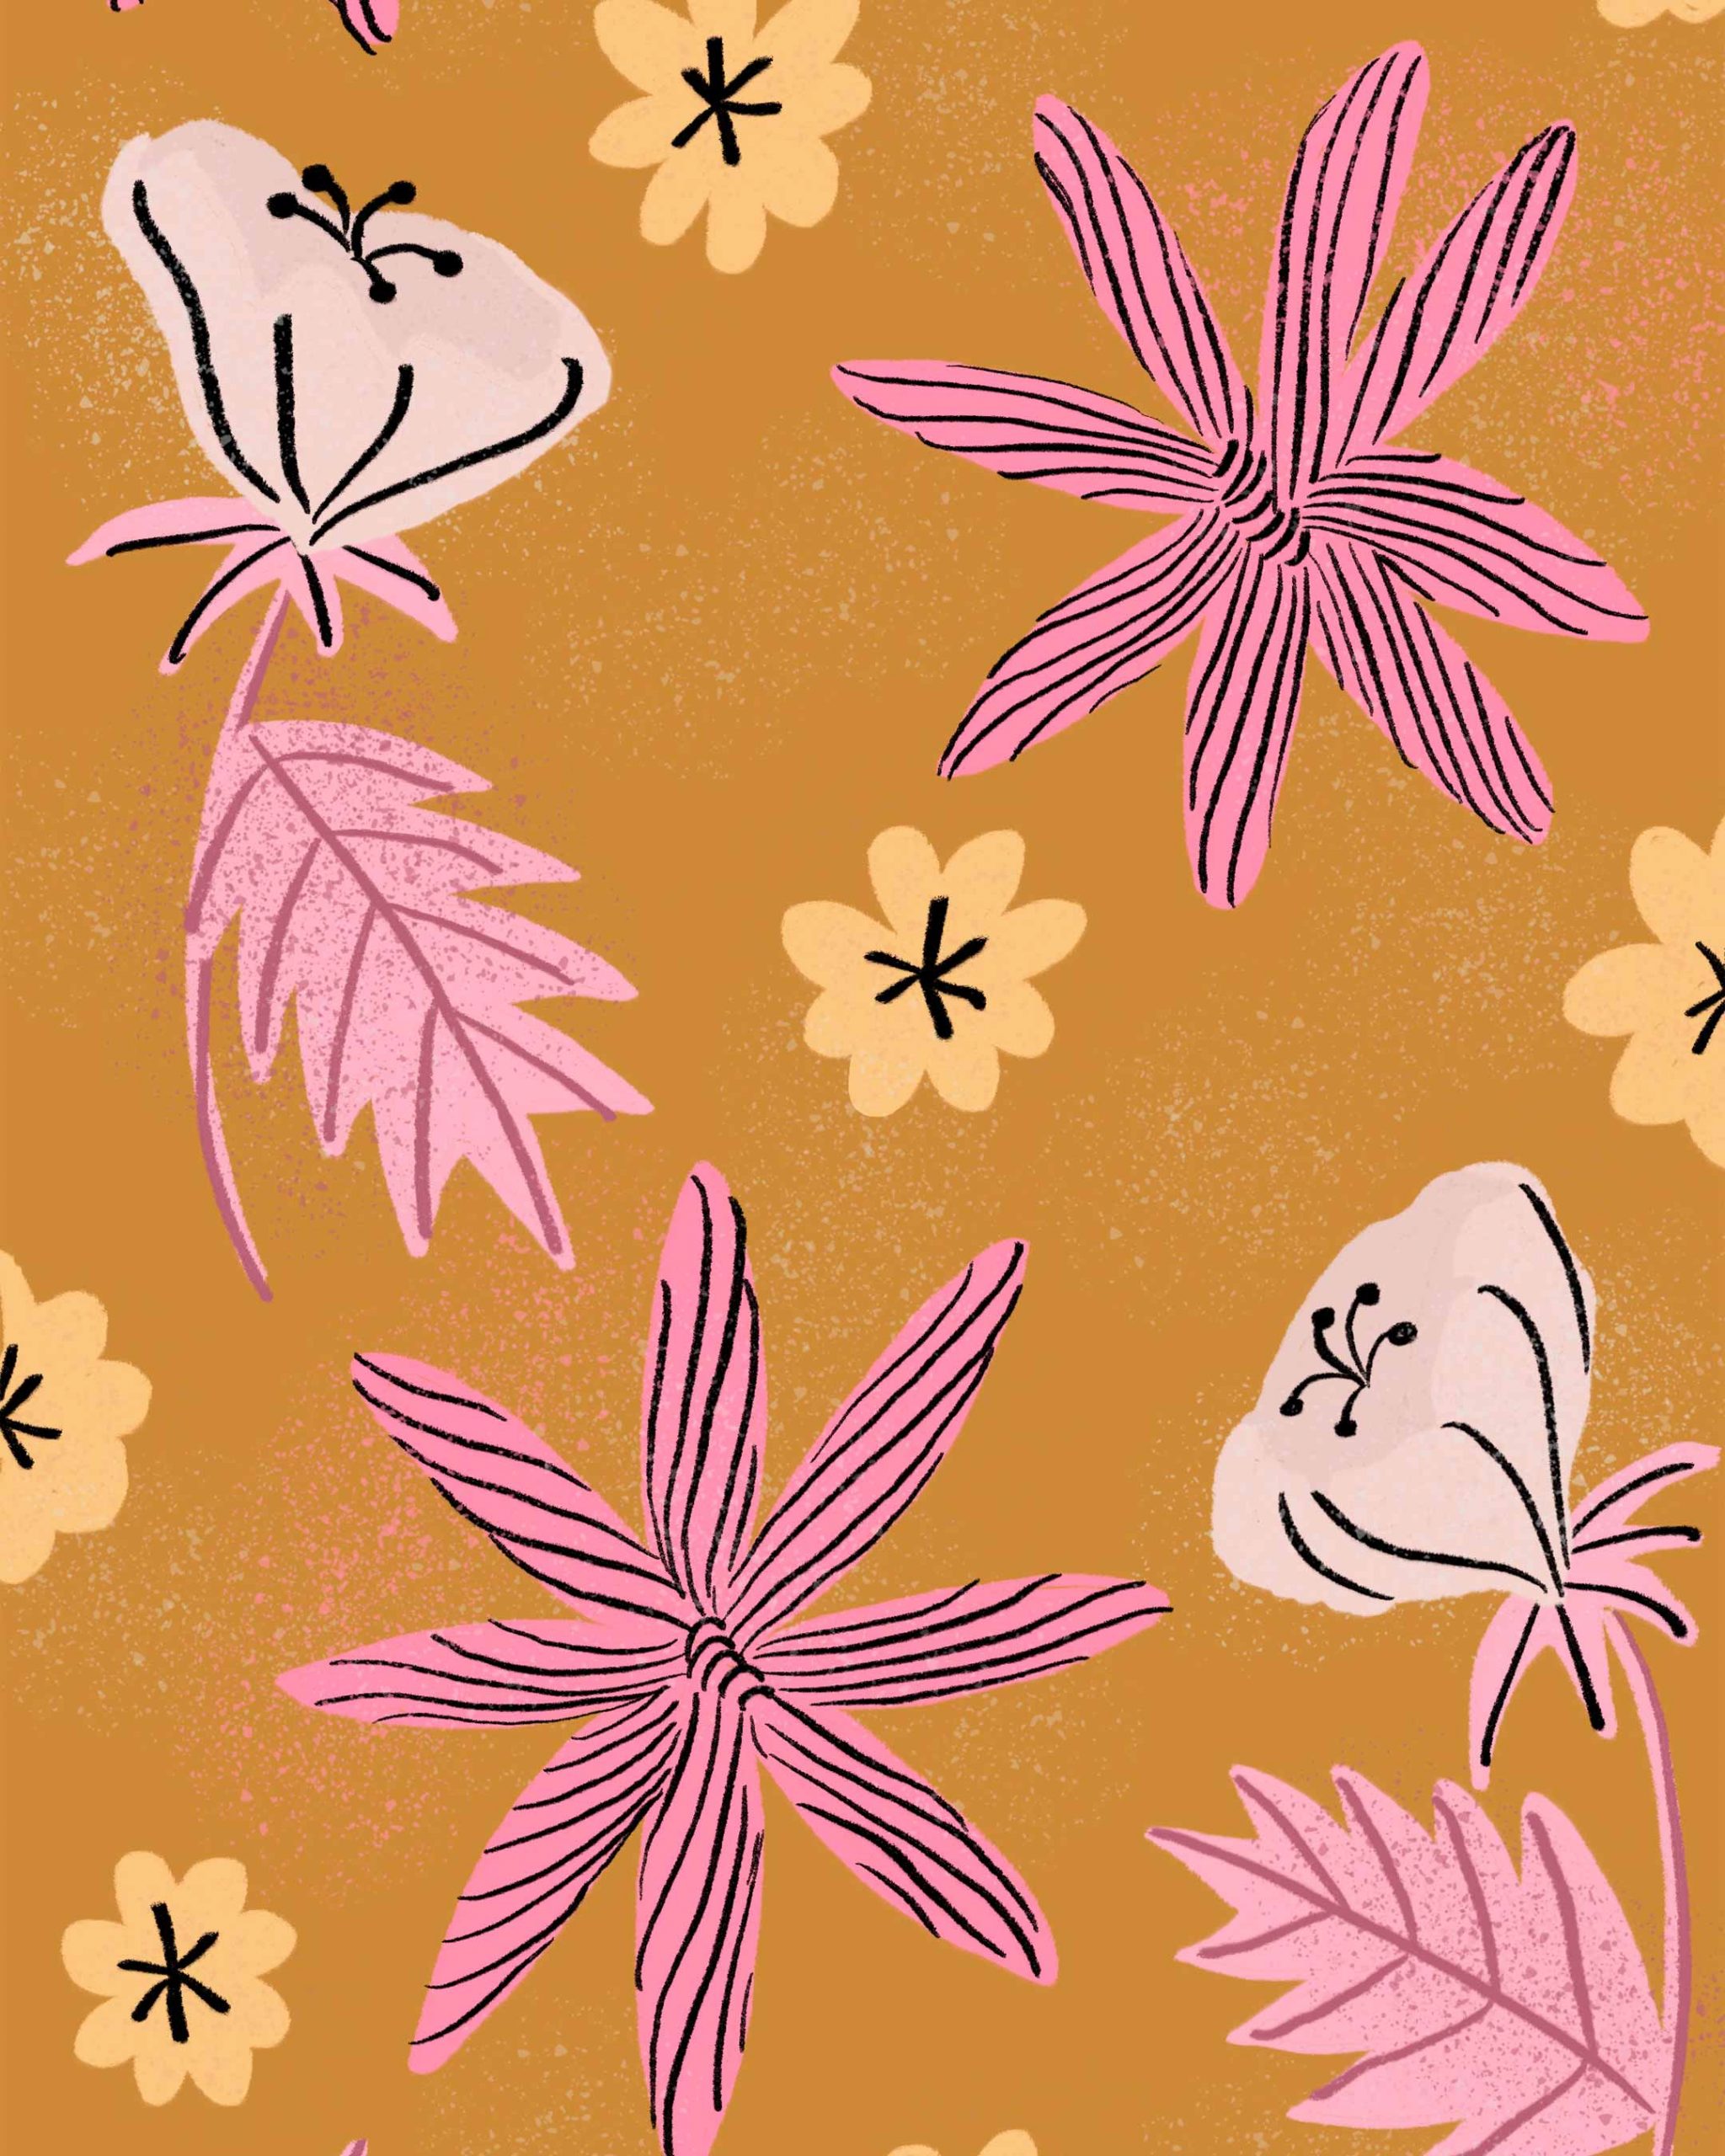 Illustration in a retro style with pink, light yellow, and cream flowers on a dark mustard yellow background